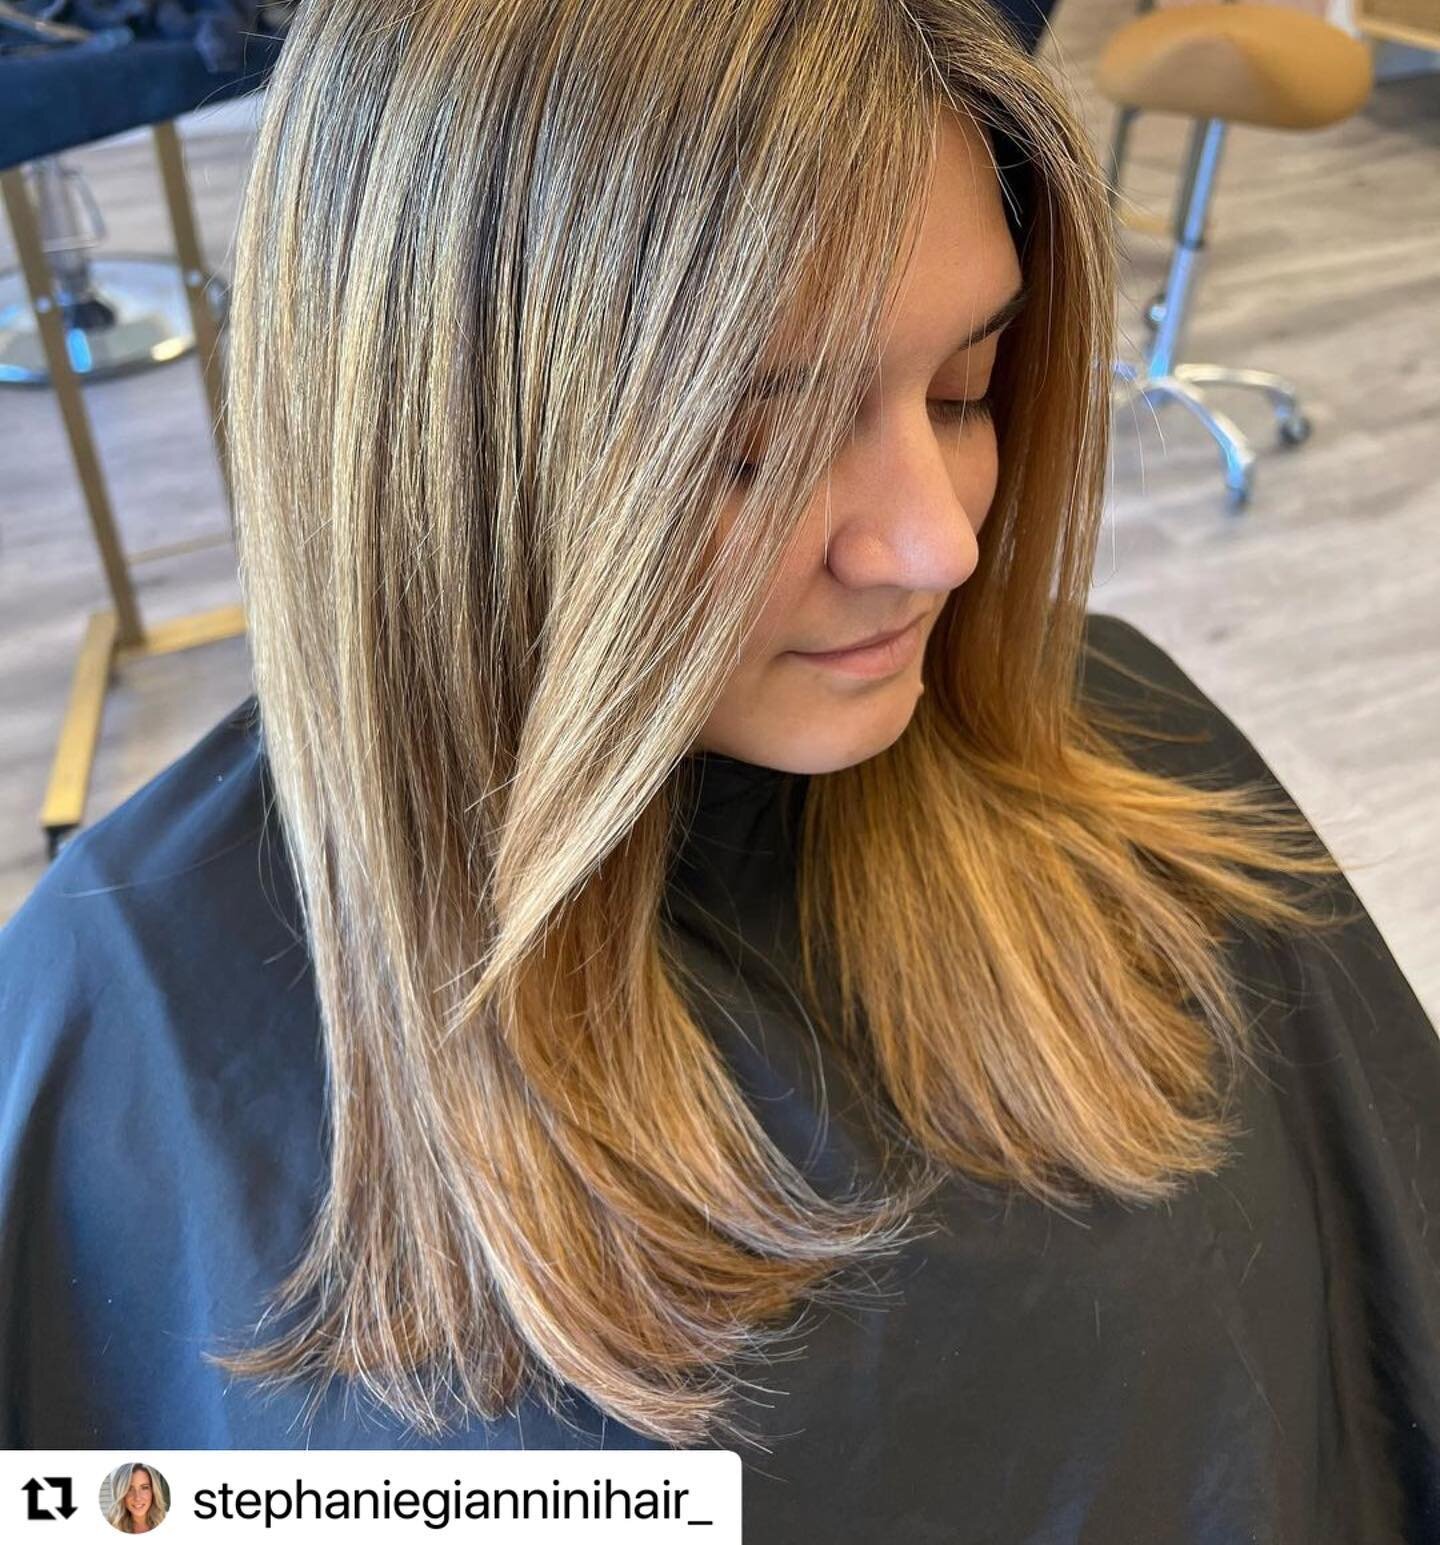 #Repost @stephaniegianninihair_ with @use.repost
・・・
Warm weather, warm hair what&rsquo;s not to love☀️ 
 #Remedy #remedysalon #remedysalonnorwell #hair #norwell #southshore #southshorehair #bostonhair #mahair #cohasset #scituate #hanover #marshfield